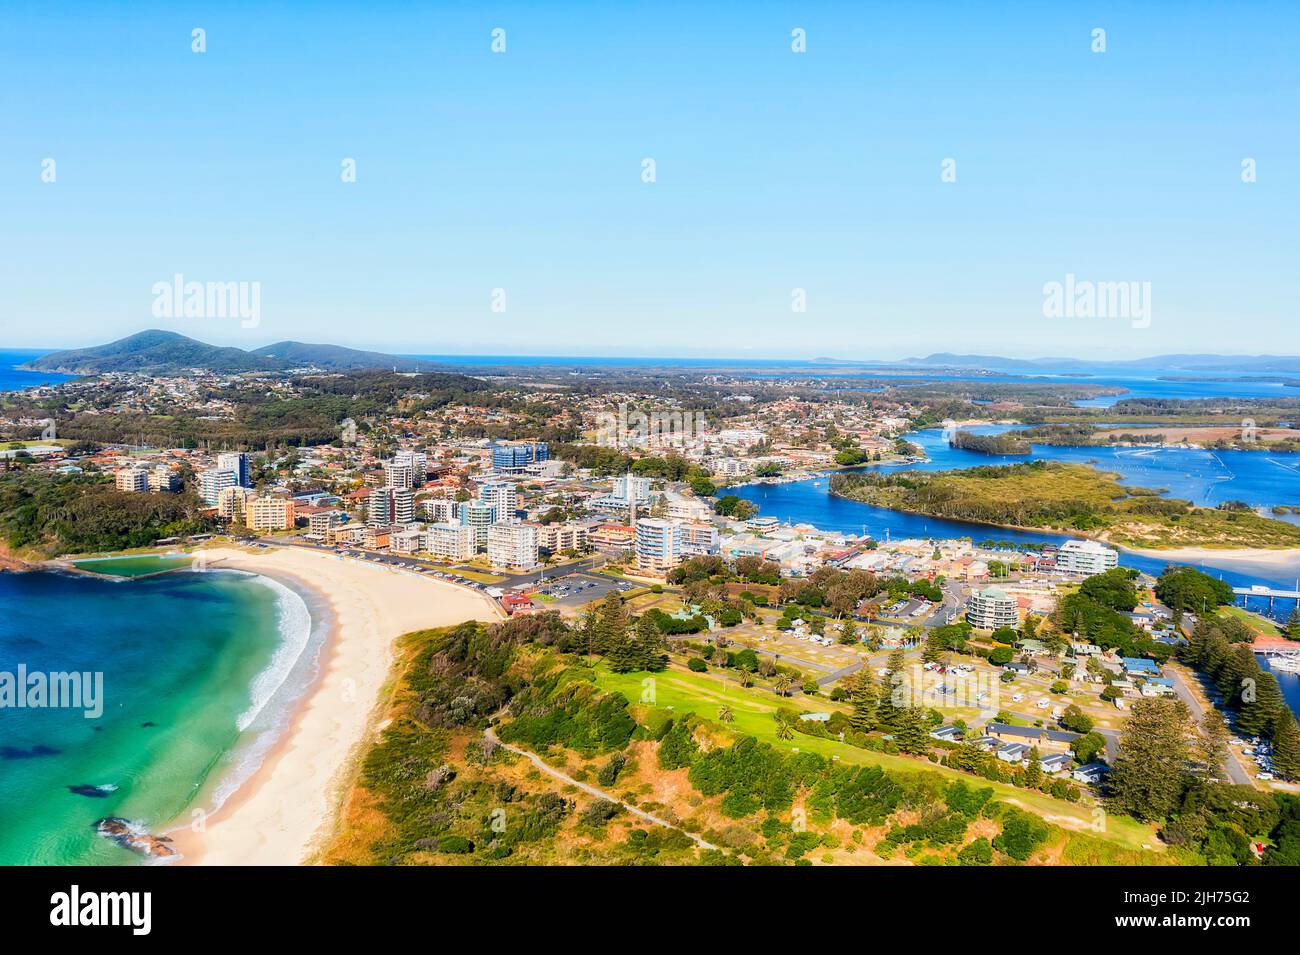 Downtown of Forster resort recreation town on Pacific Barrington coast of Australia in aerial scenic landscape view over main beach. Stock Photo